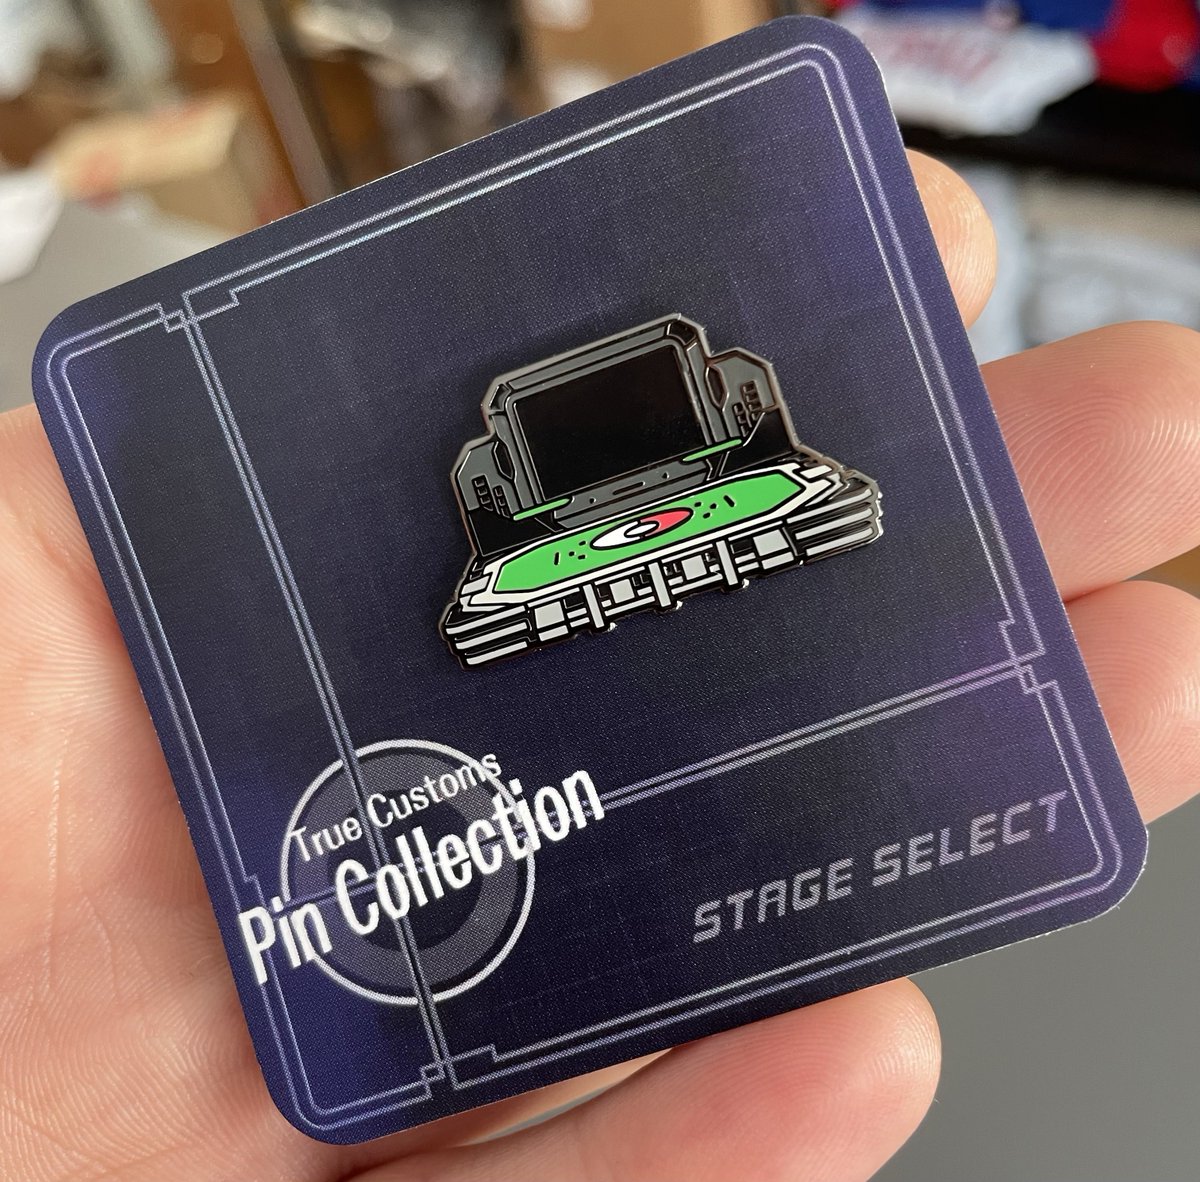 Finally have a Stadium pin so here's another GIVEAWAY like/RT/follow & winner will be picked this Friday (11/25) @ 8 PM EST 🍻